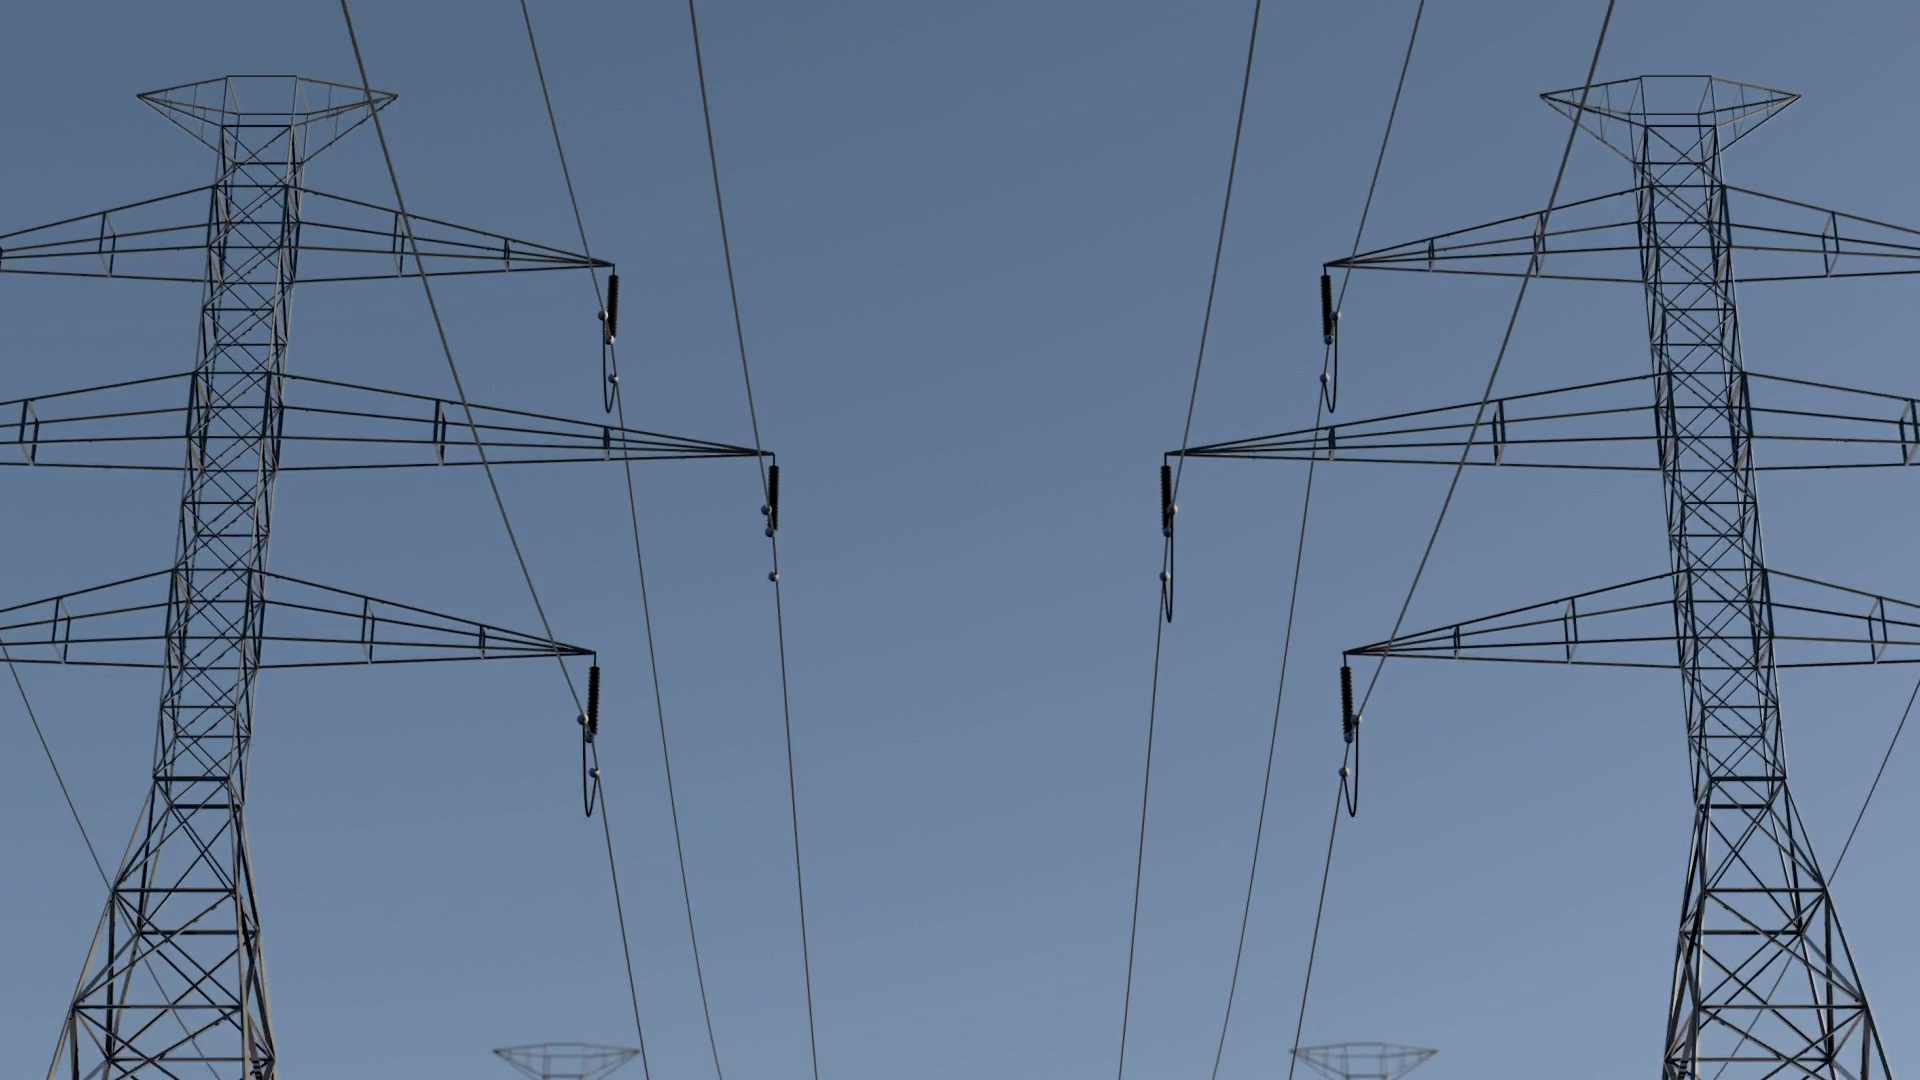 Electricity pylons. Moving along two row of pylons. electric high ...